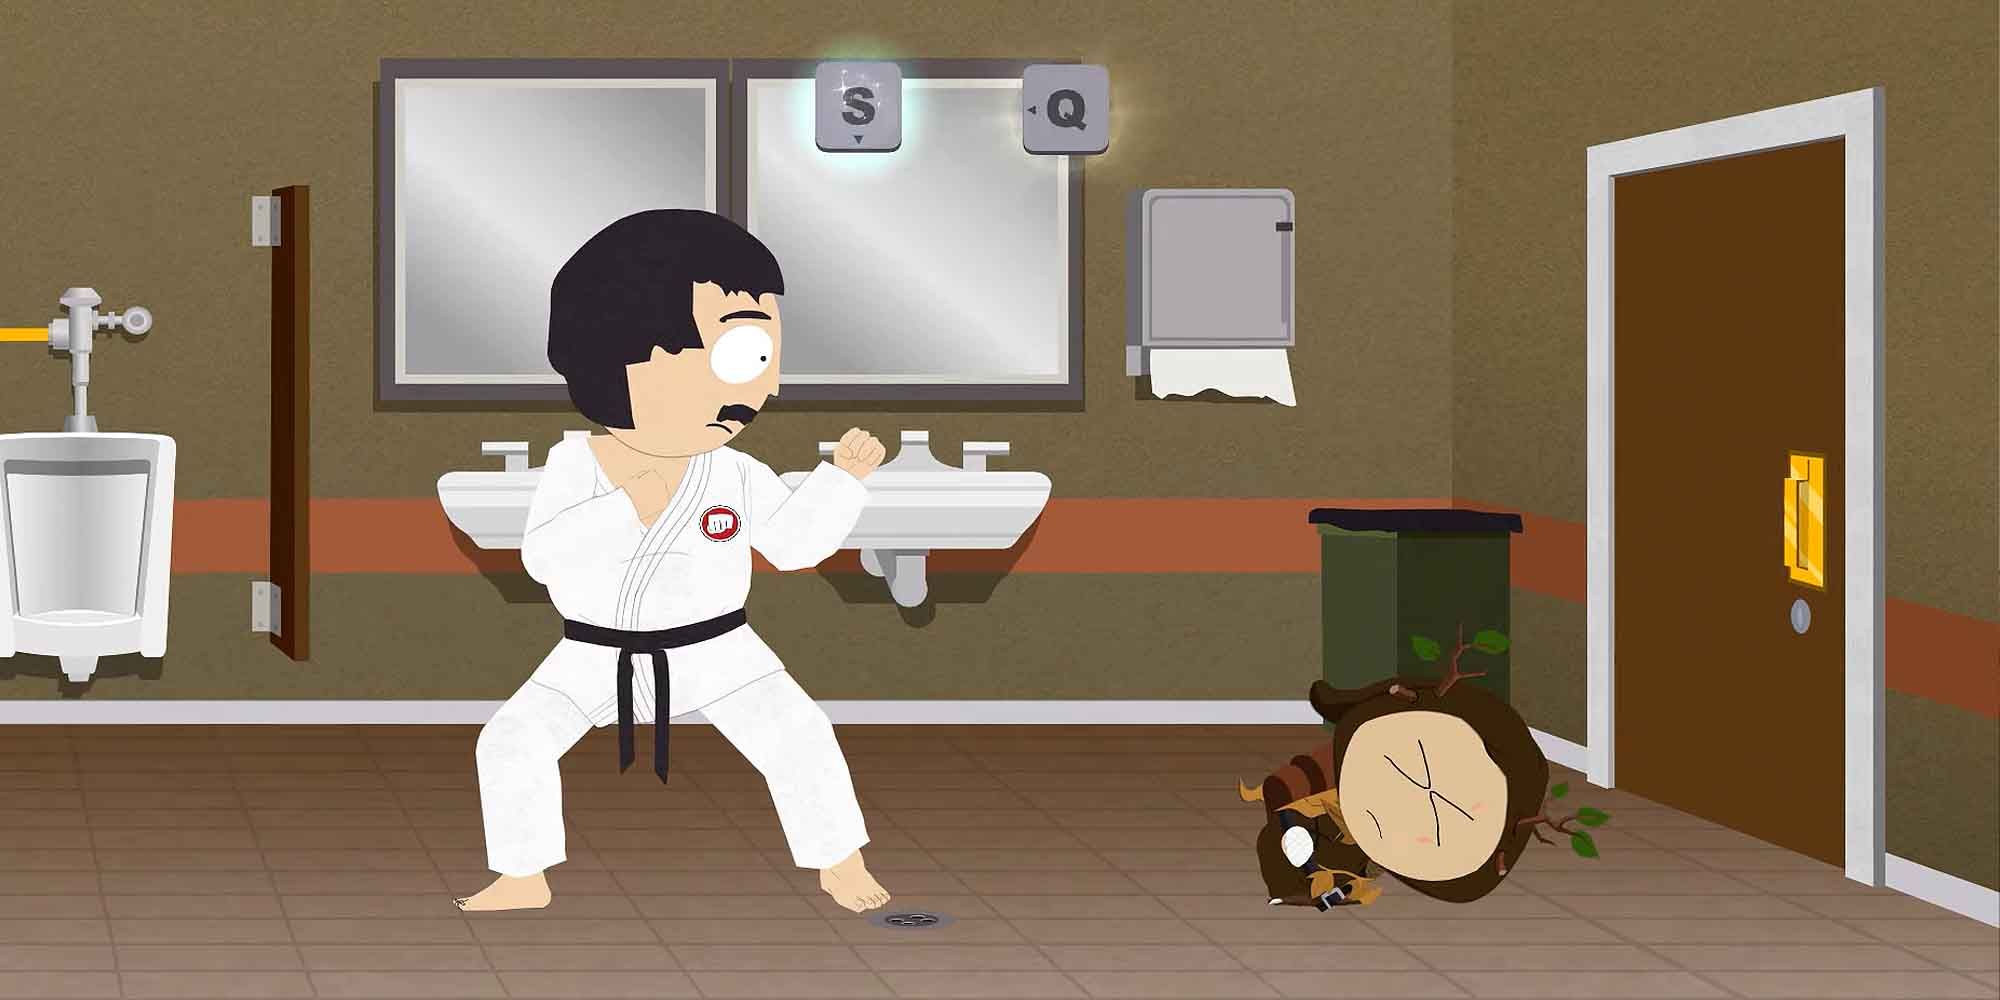 Being taught a new technique by Randy in South Park: The Stick of Truth